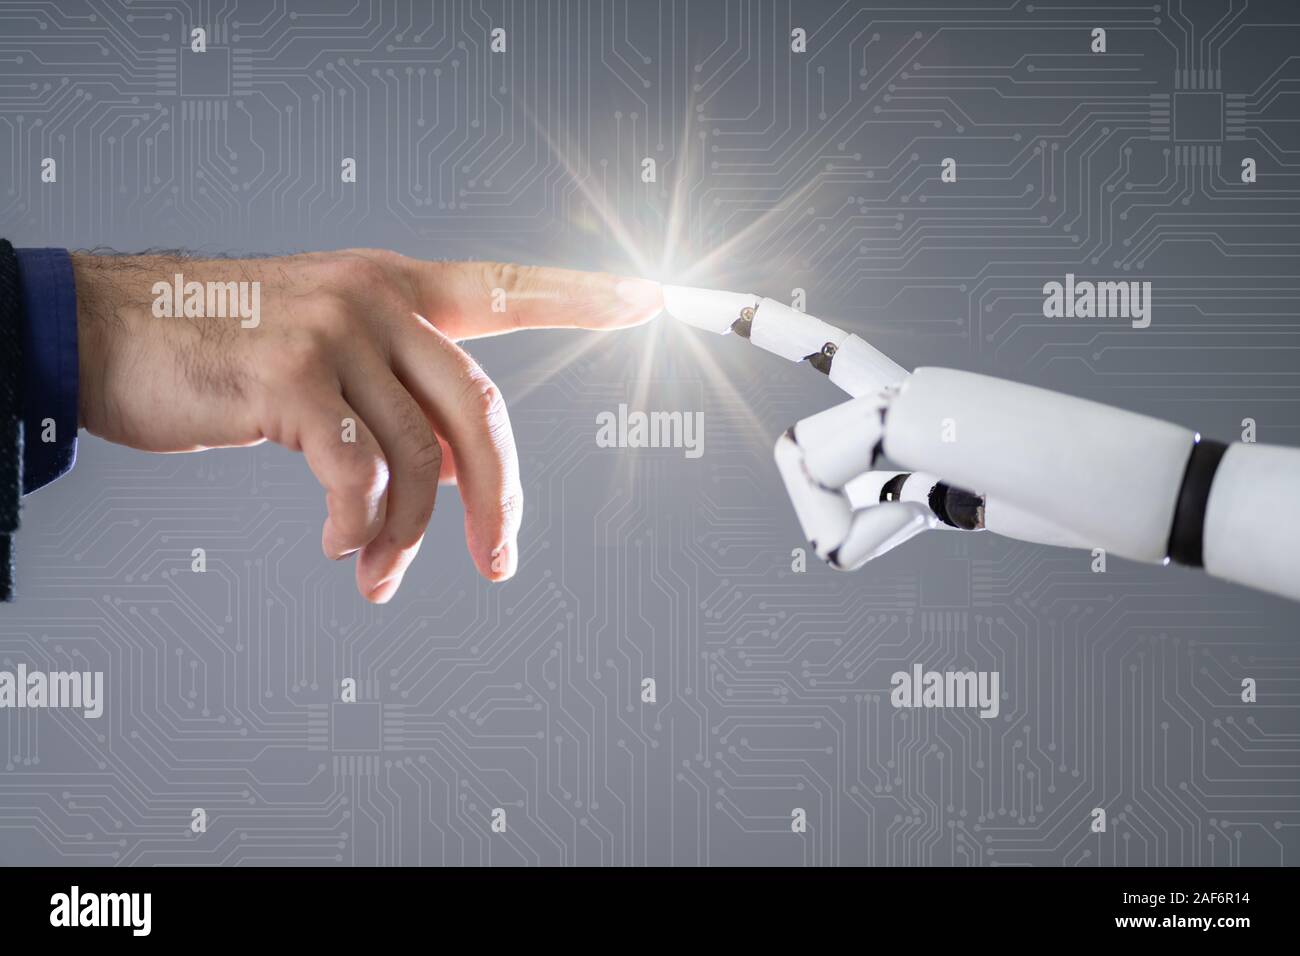 Robot Touching Human Finger Against Gray Background Stock Photo